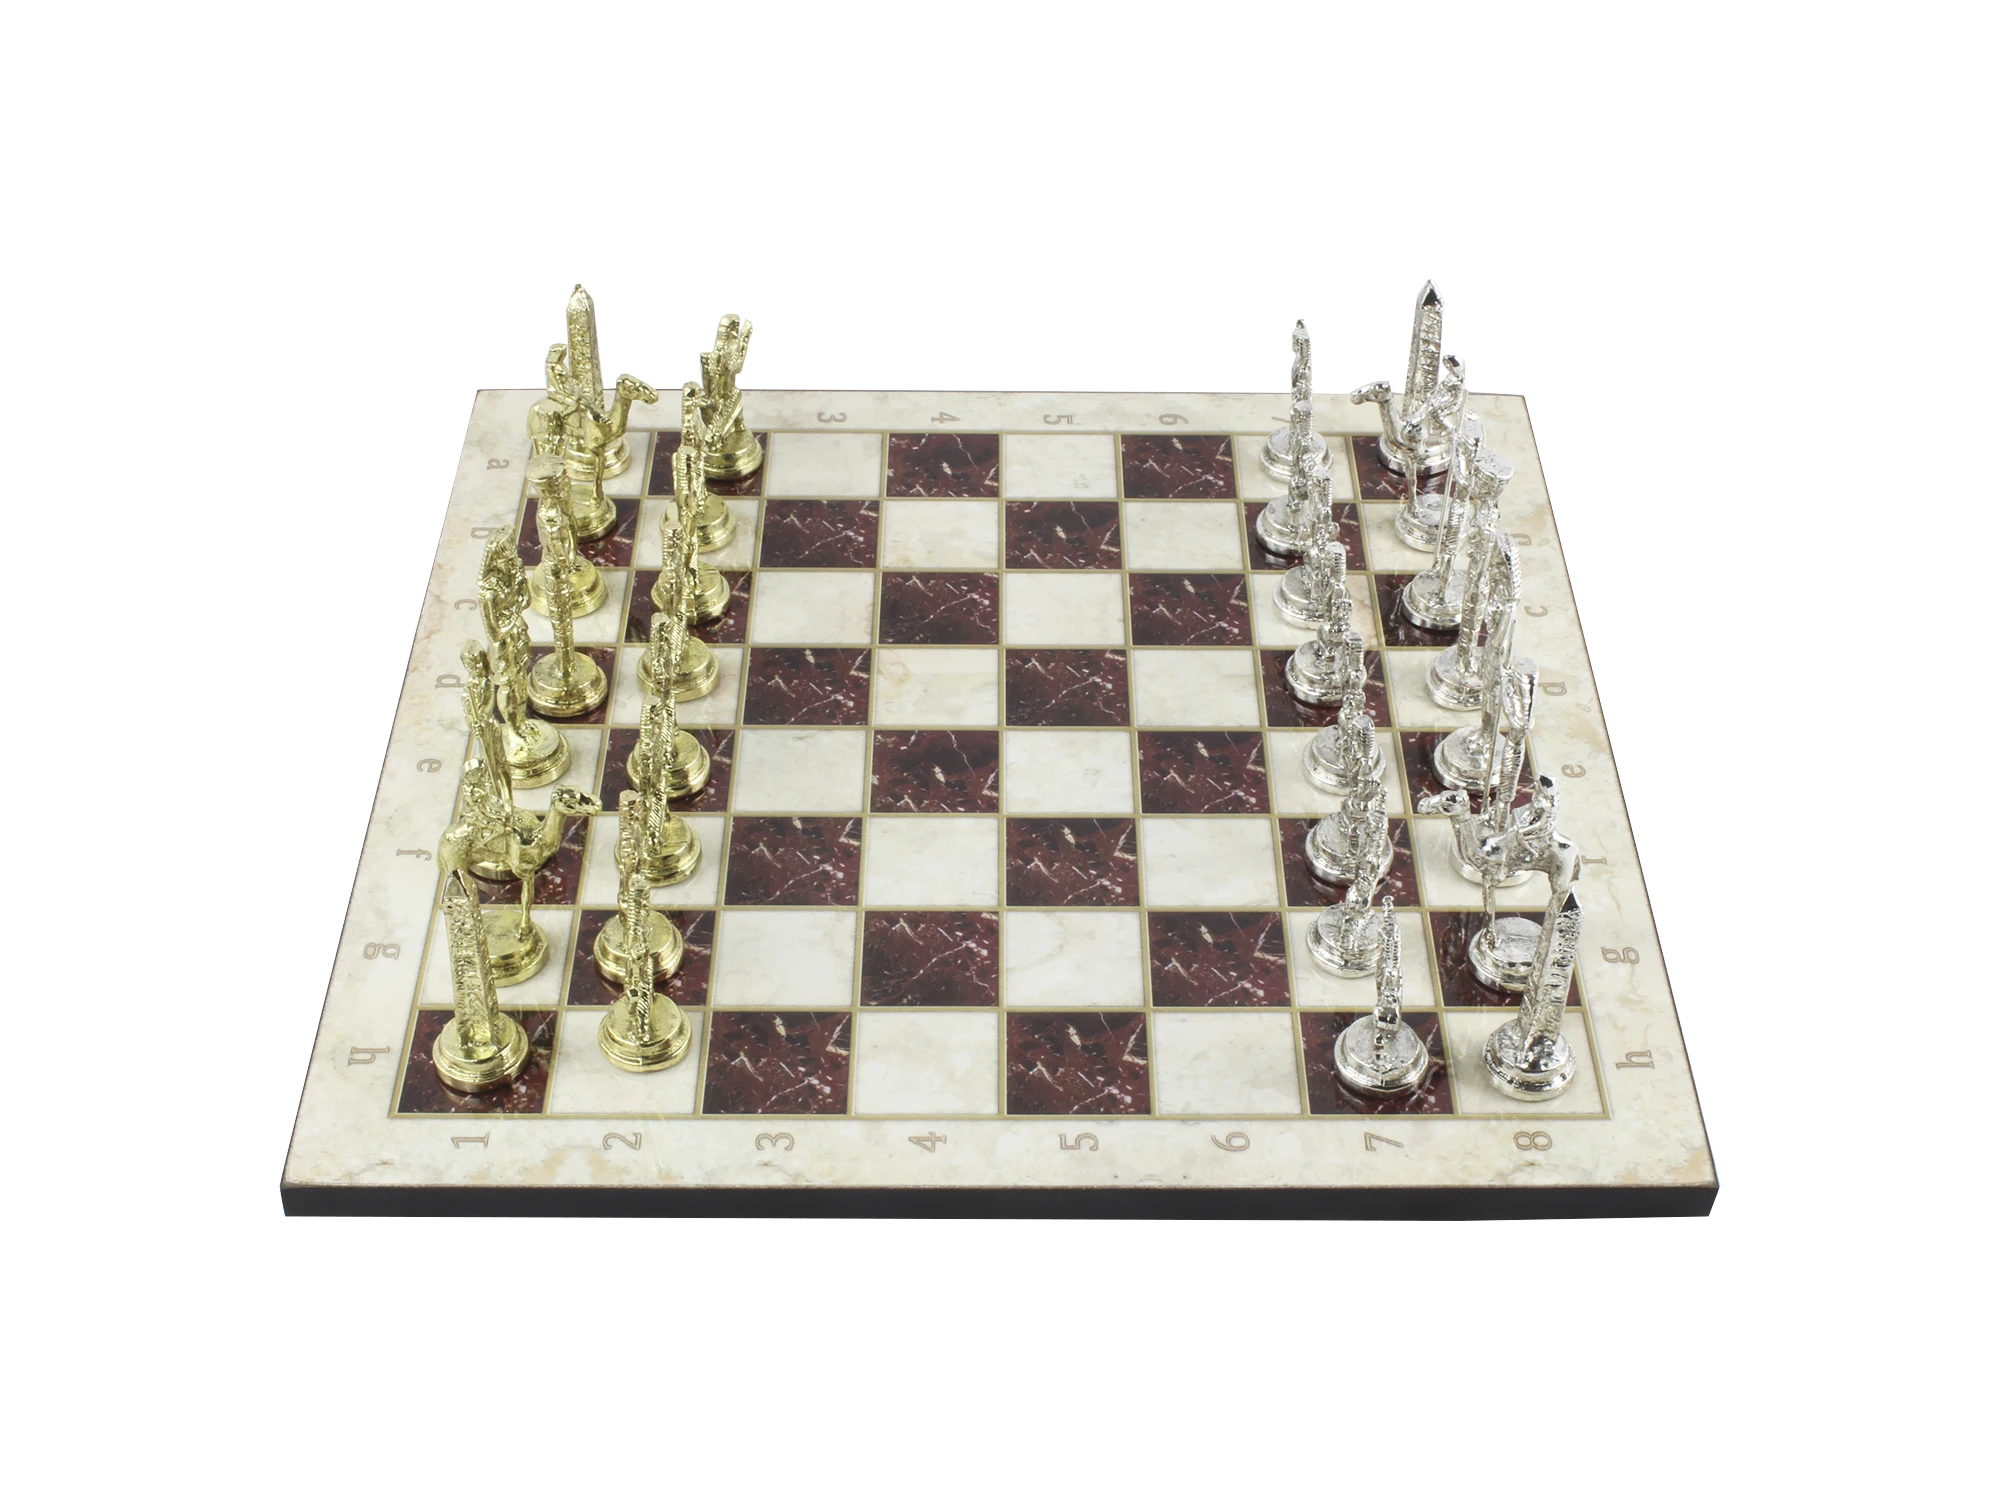 14.5 Inch Marble Design Chessboard and Figures Marble Patterned Chess Board Game Wooden Board Game with Egypt Pharaoh Figures t con logic board 32 inch 6870c 0401b screen lc320eun sef1 for lg 32ls5600 zc 32lm620t 37ls5600 zc 37lt670h 6871l 2830b 2753s